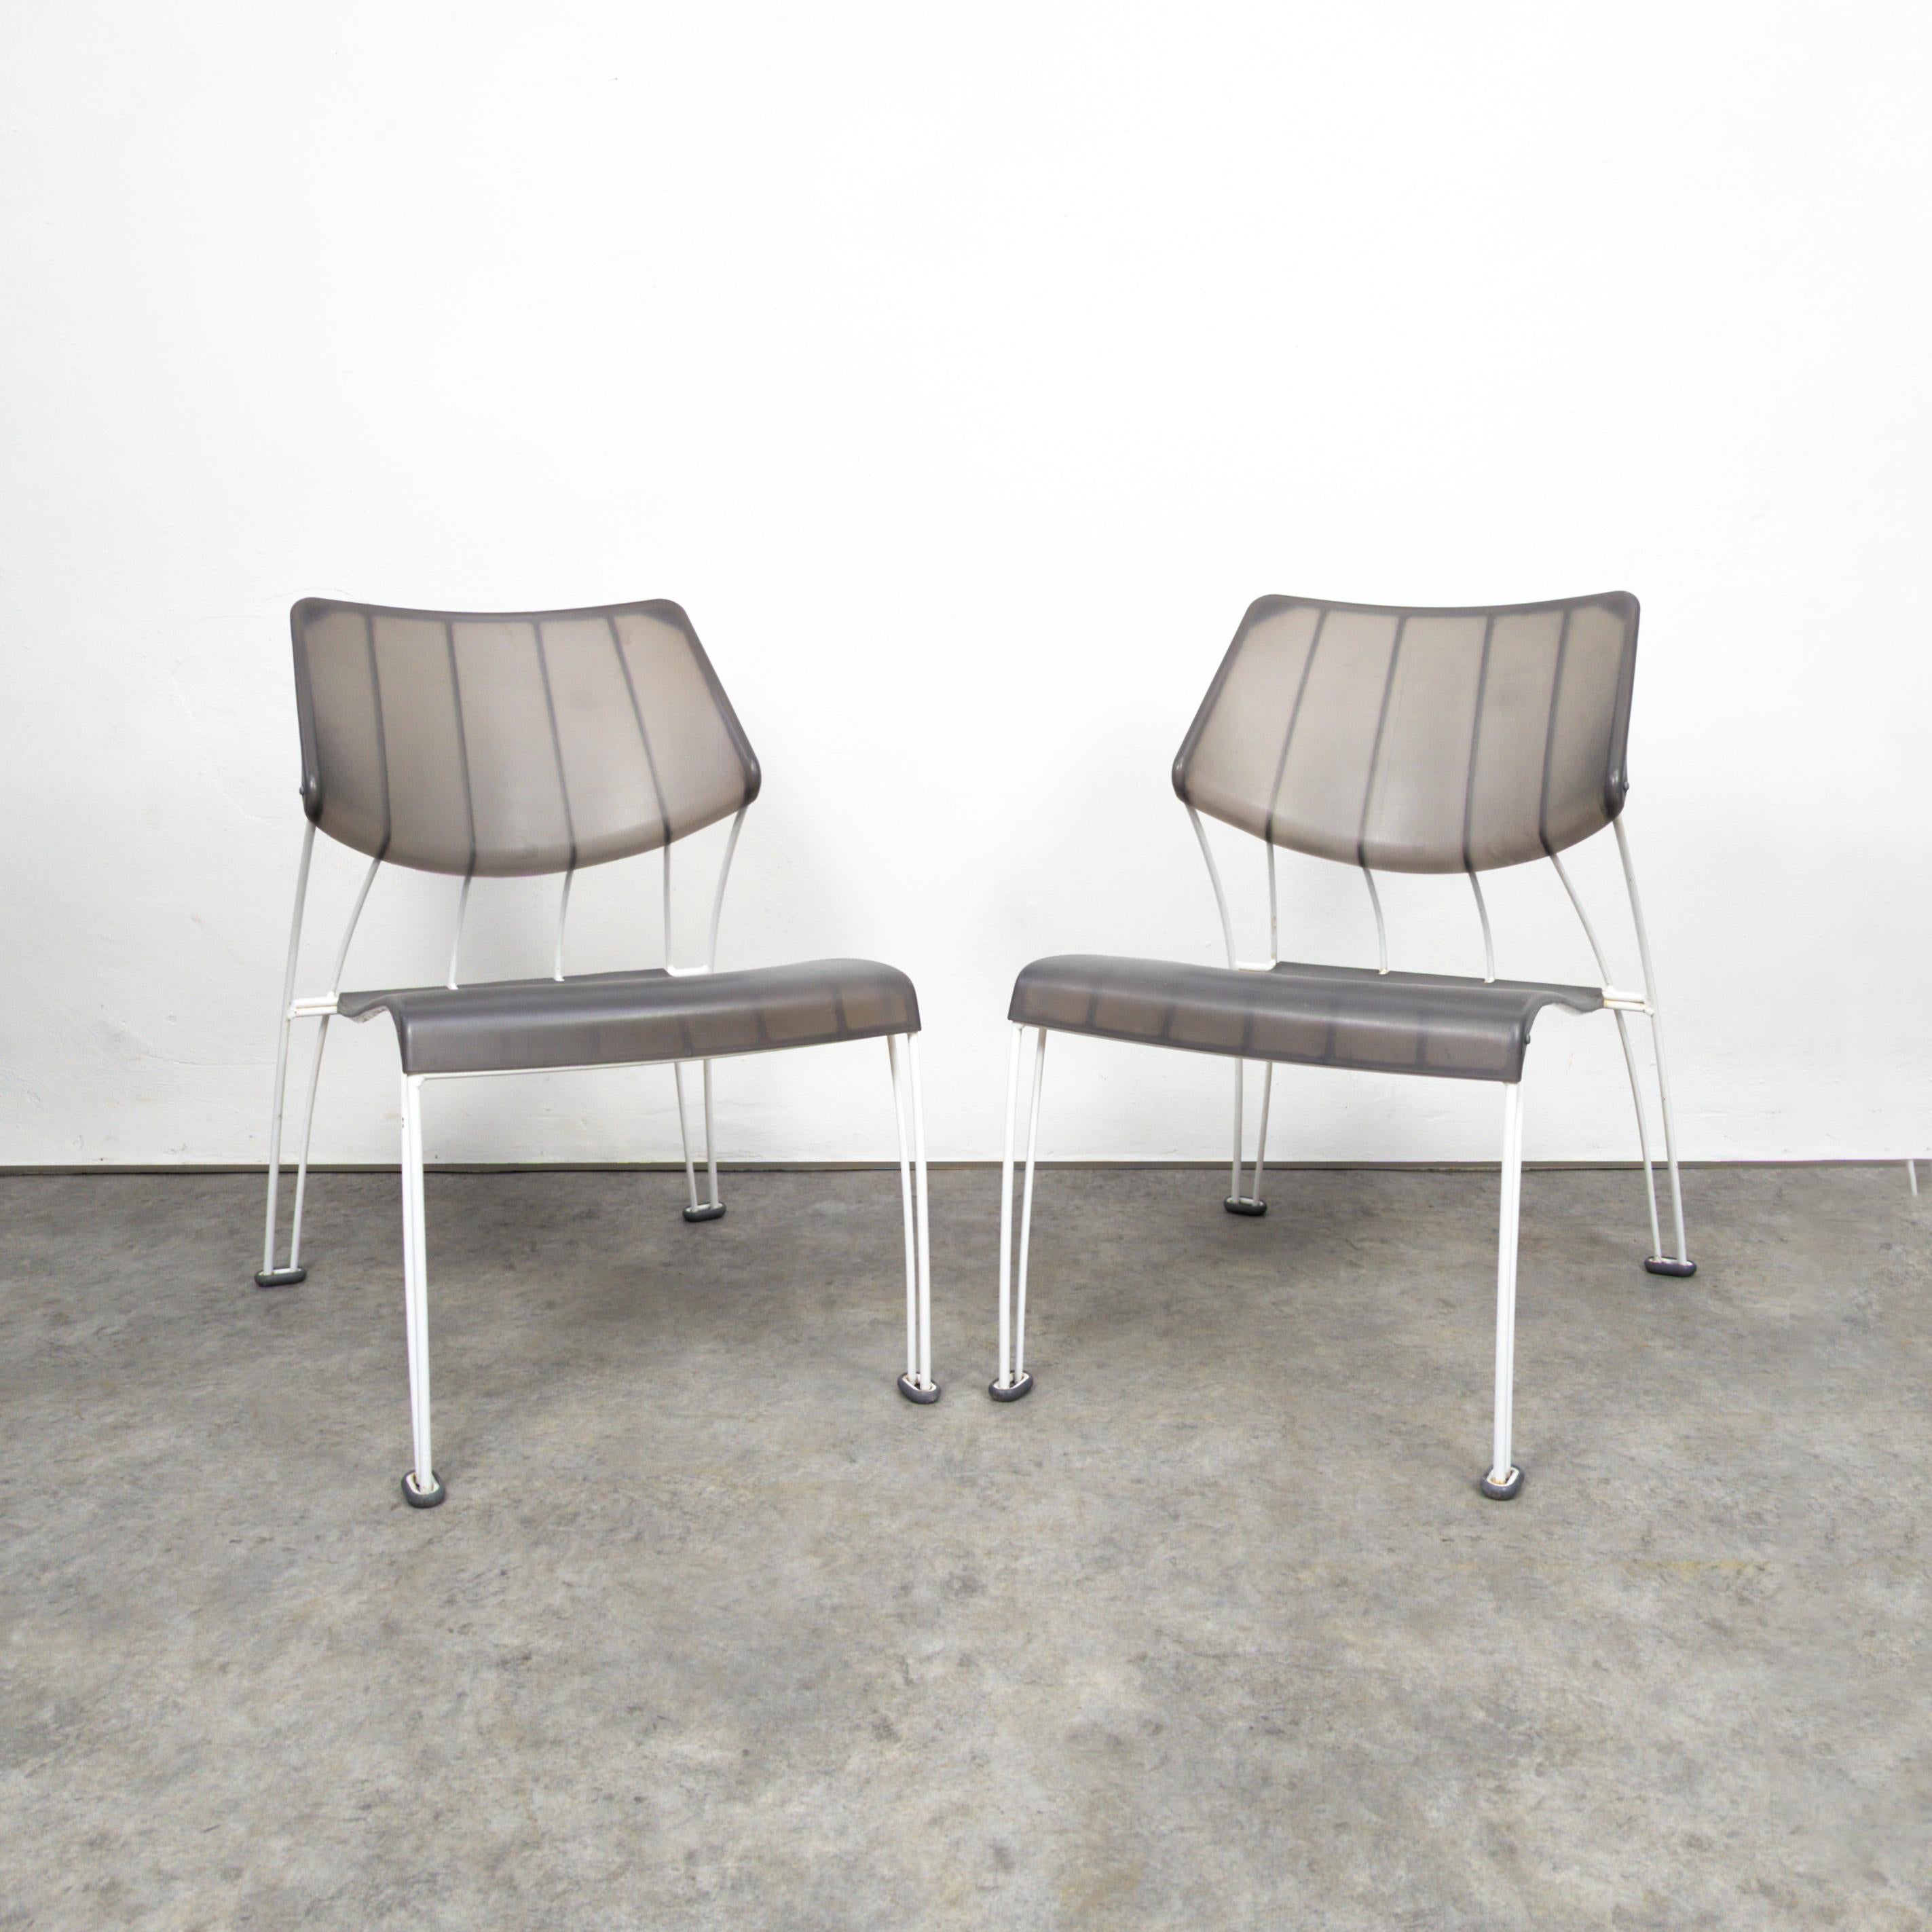 Post-Modern Pair of PS Hässlö outdoor lounge chairs by Monika Mulder for Ikea, 1990s For Sale